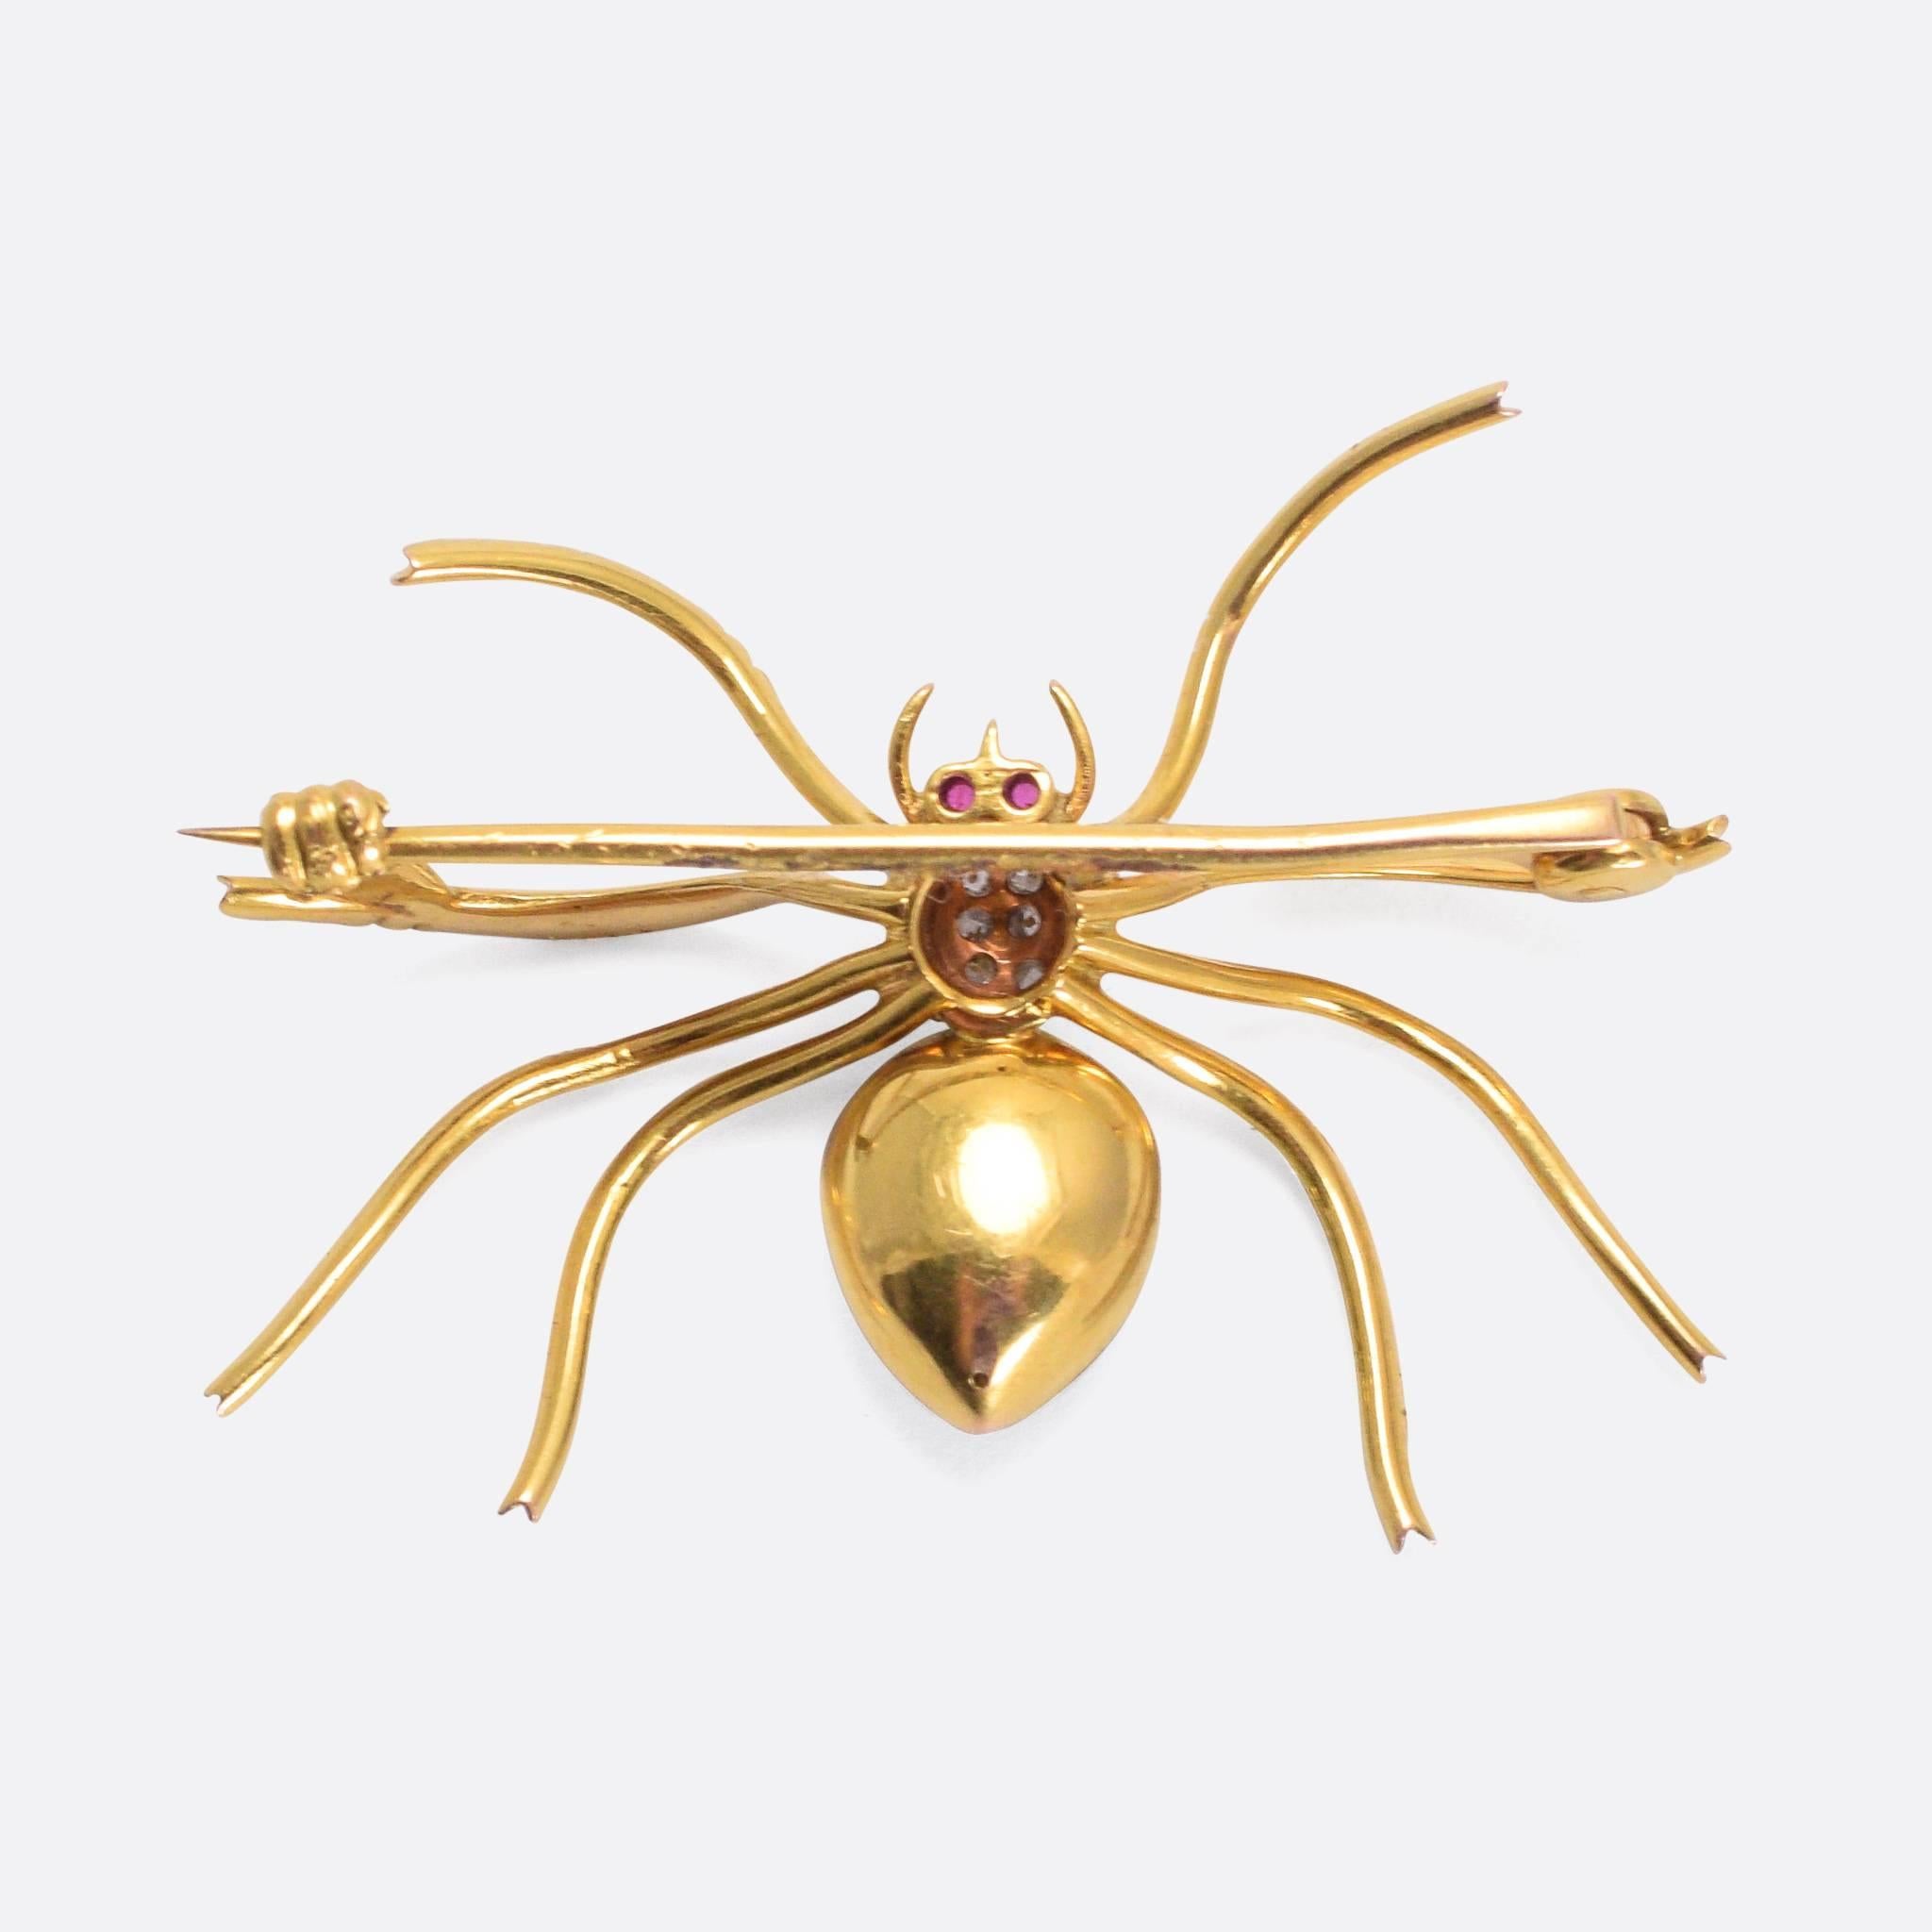 A late Victorian spider brooch, finished in vitreous guilloche enamelling and set with diamonds and ruby eyes. It's a good size (3.8cm across), and is finely worked in 15 karat gold.

STONES
Rubies and Diamonds

MEASUREMENTS
3.8 x